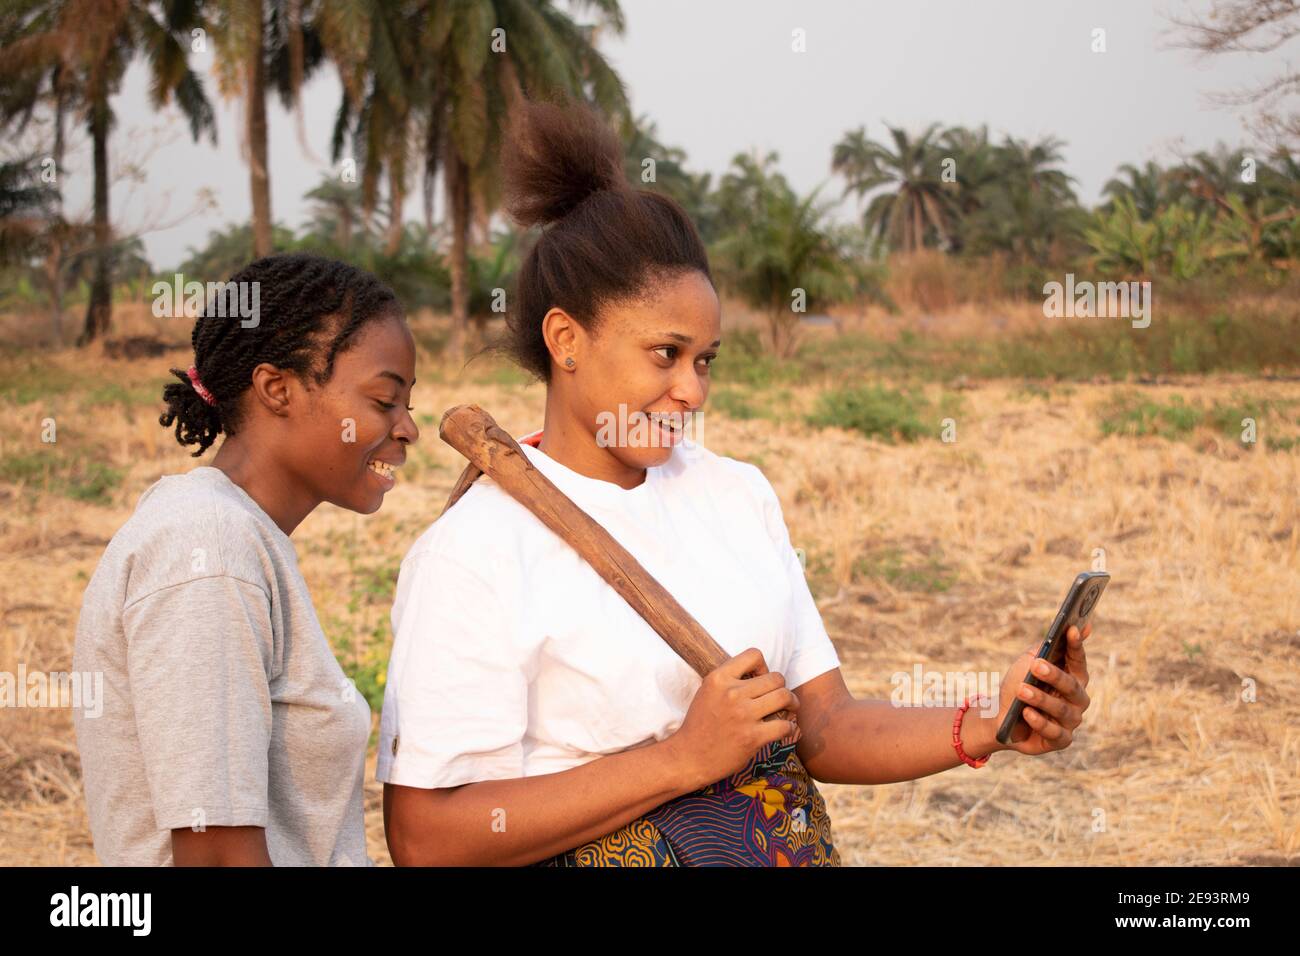 two women viewing a mobile phone at a farmland Stock Photo